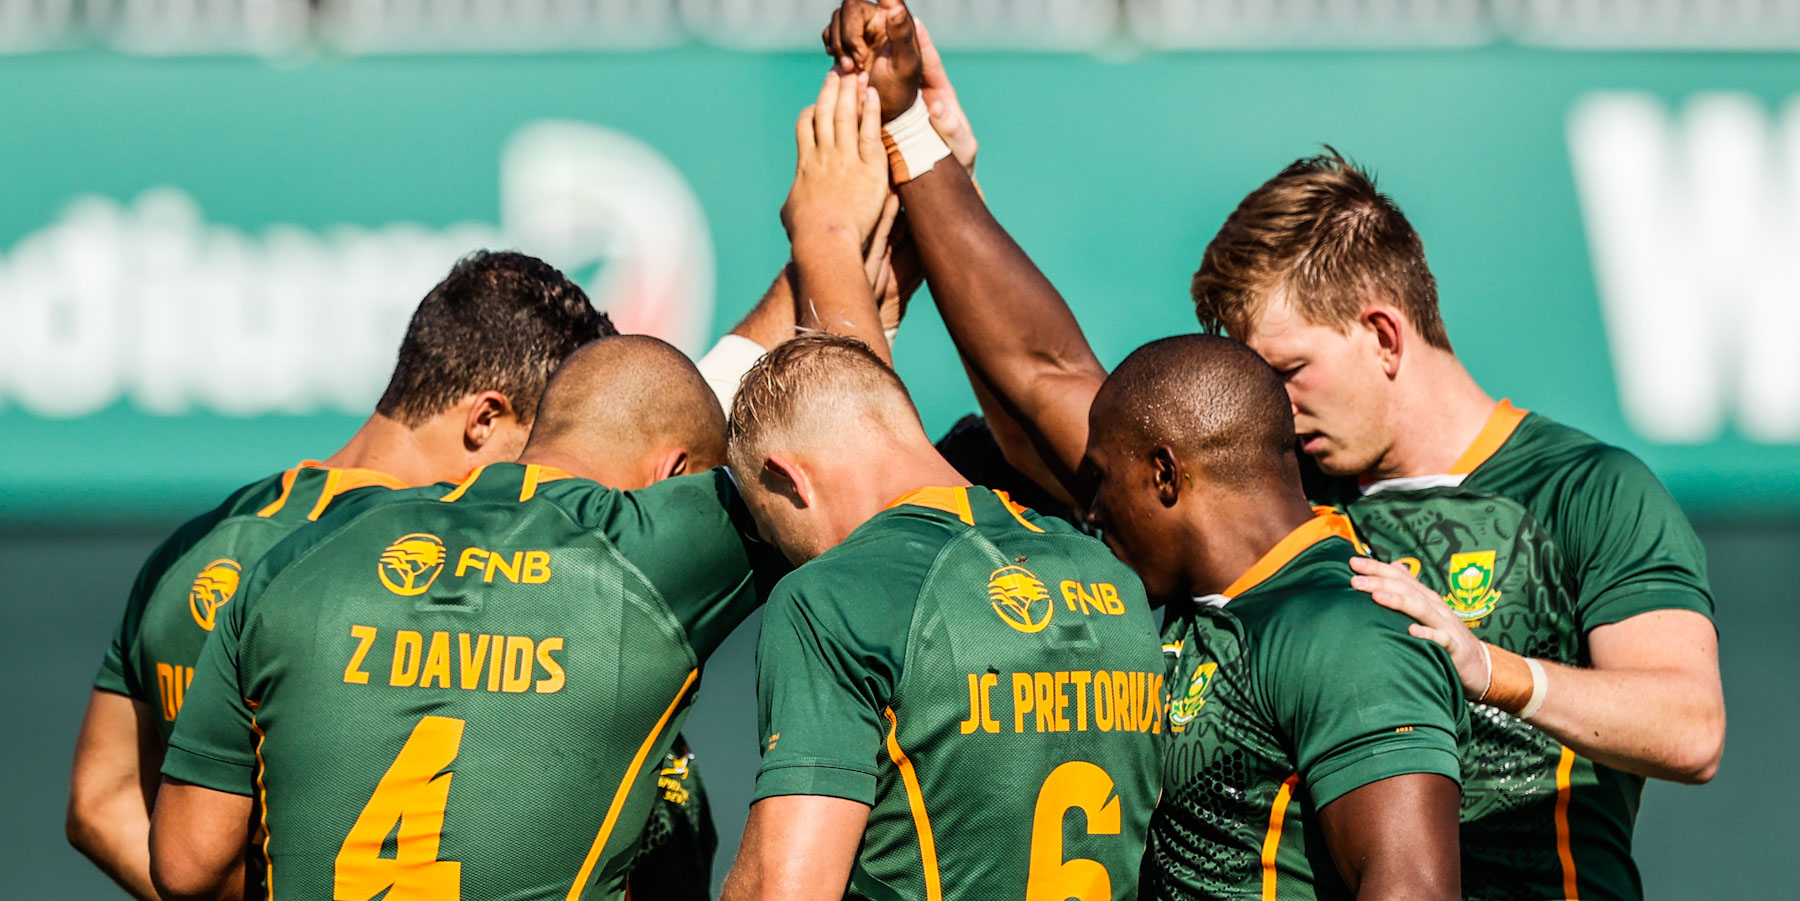 FNB has been a long-time supporter and partner of rugby in South Africa.